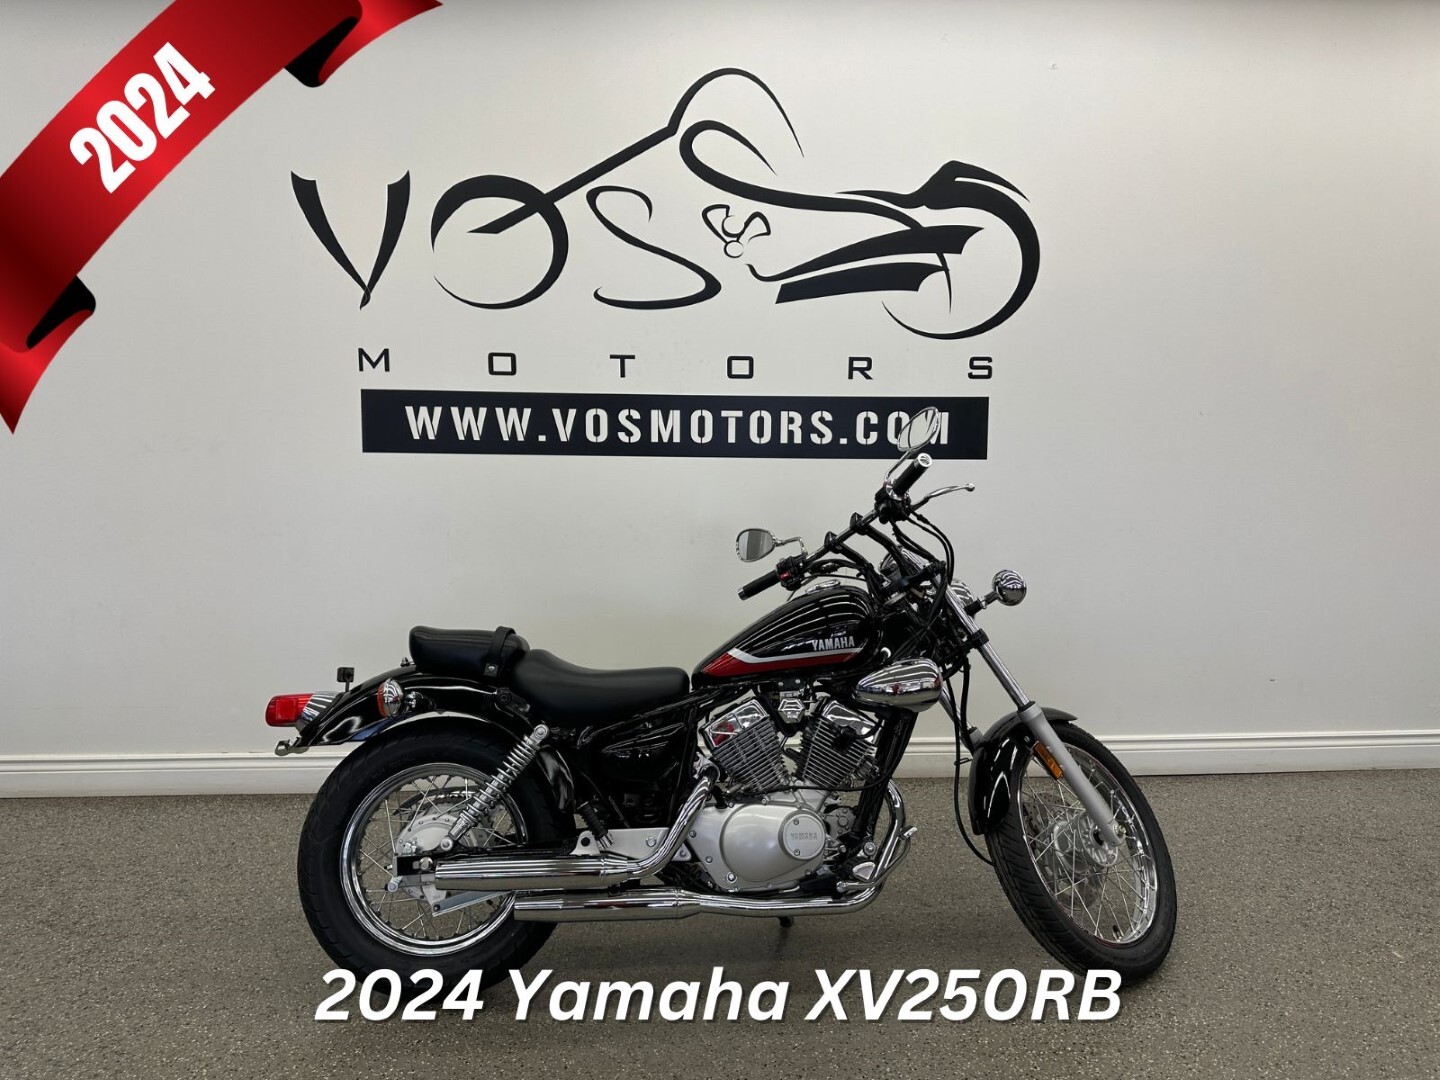 2024 Yamaha XV250RB XV250RB - V6012NP - -No Payments for 1 Year**